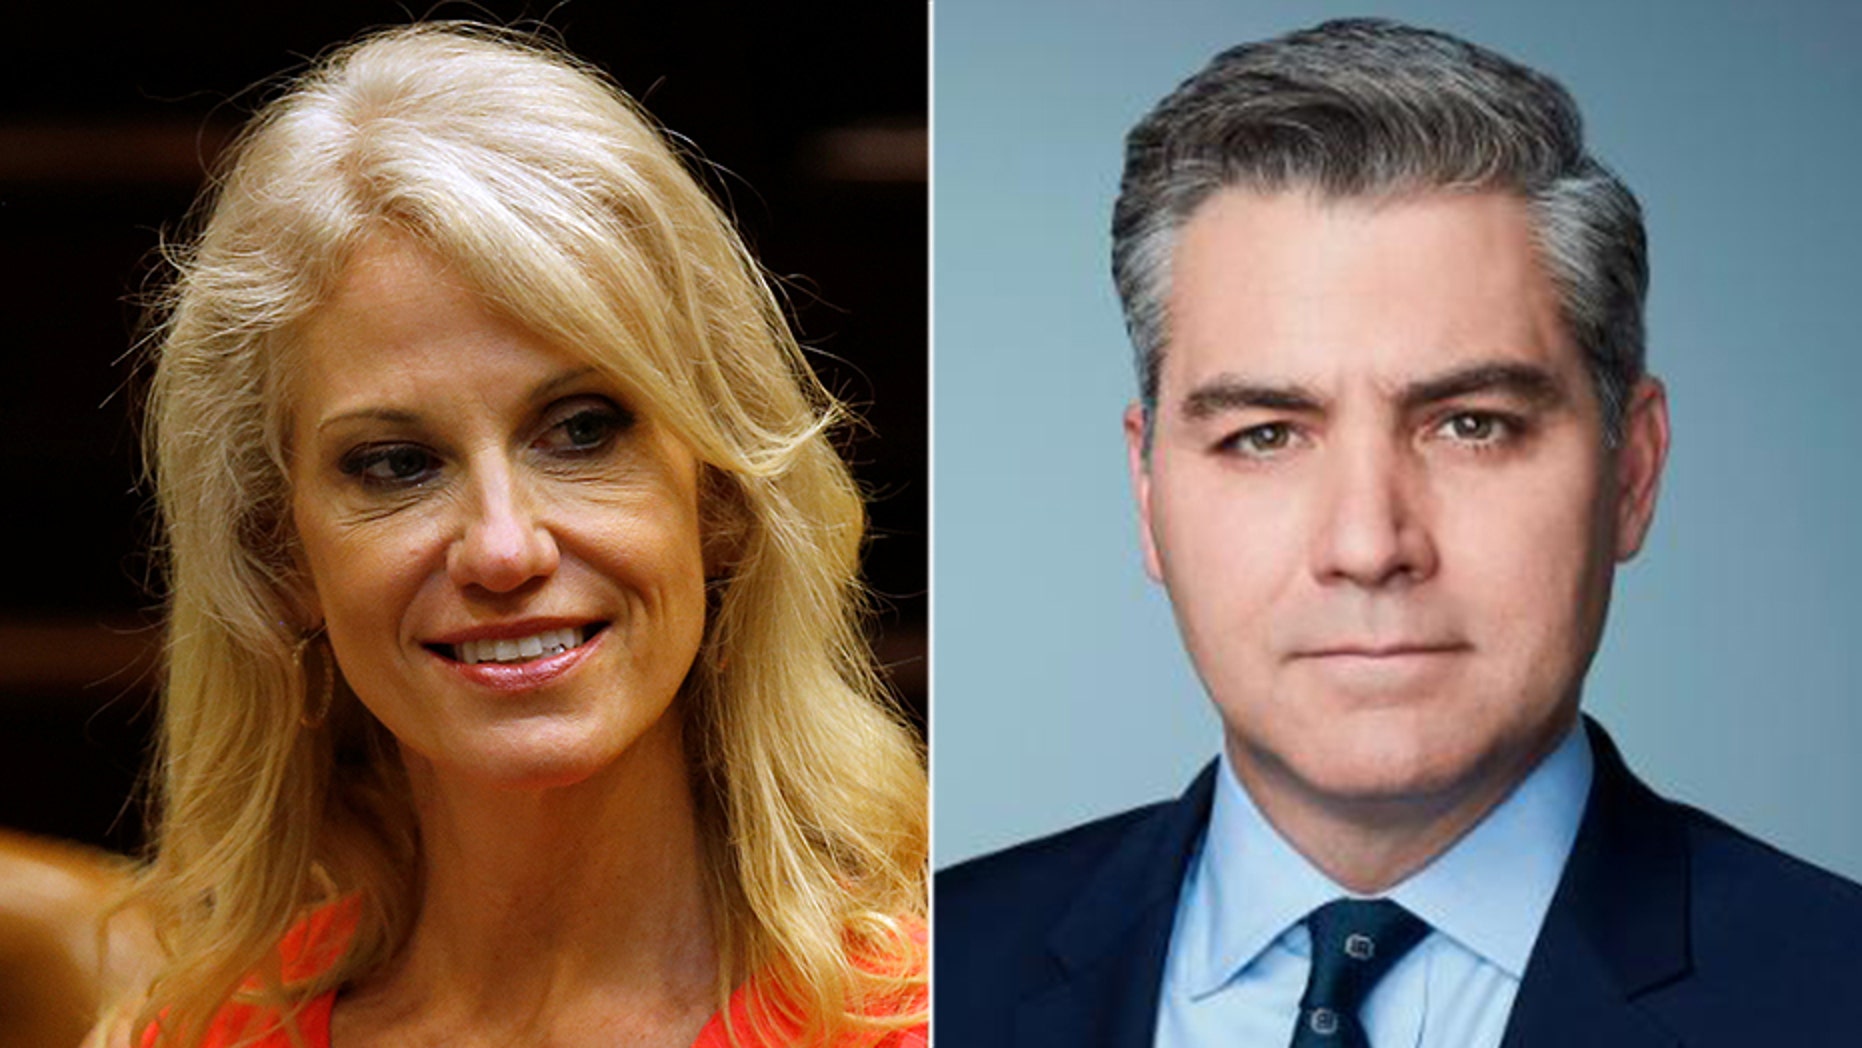 Kellyanne Conway mocked CNN White House correspondent Jim Acosta during a press gaggle on Tuesday.